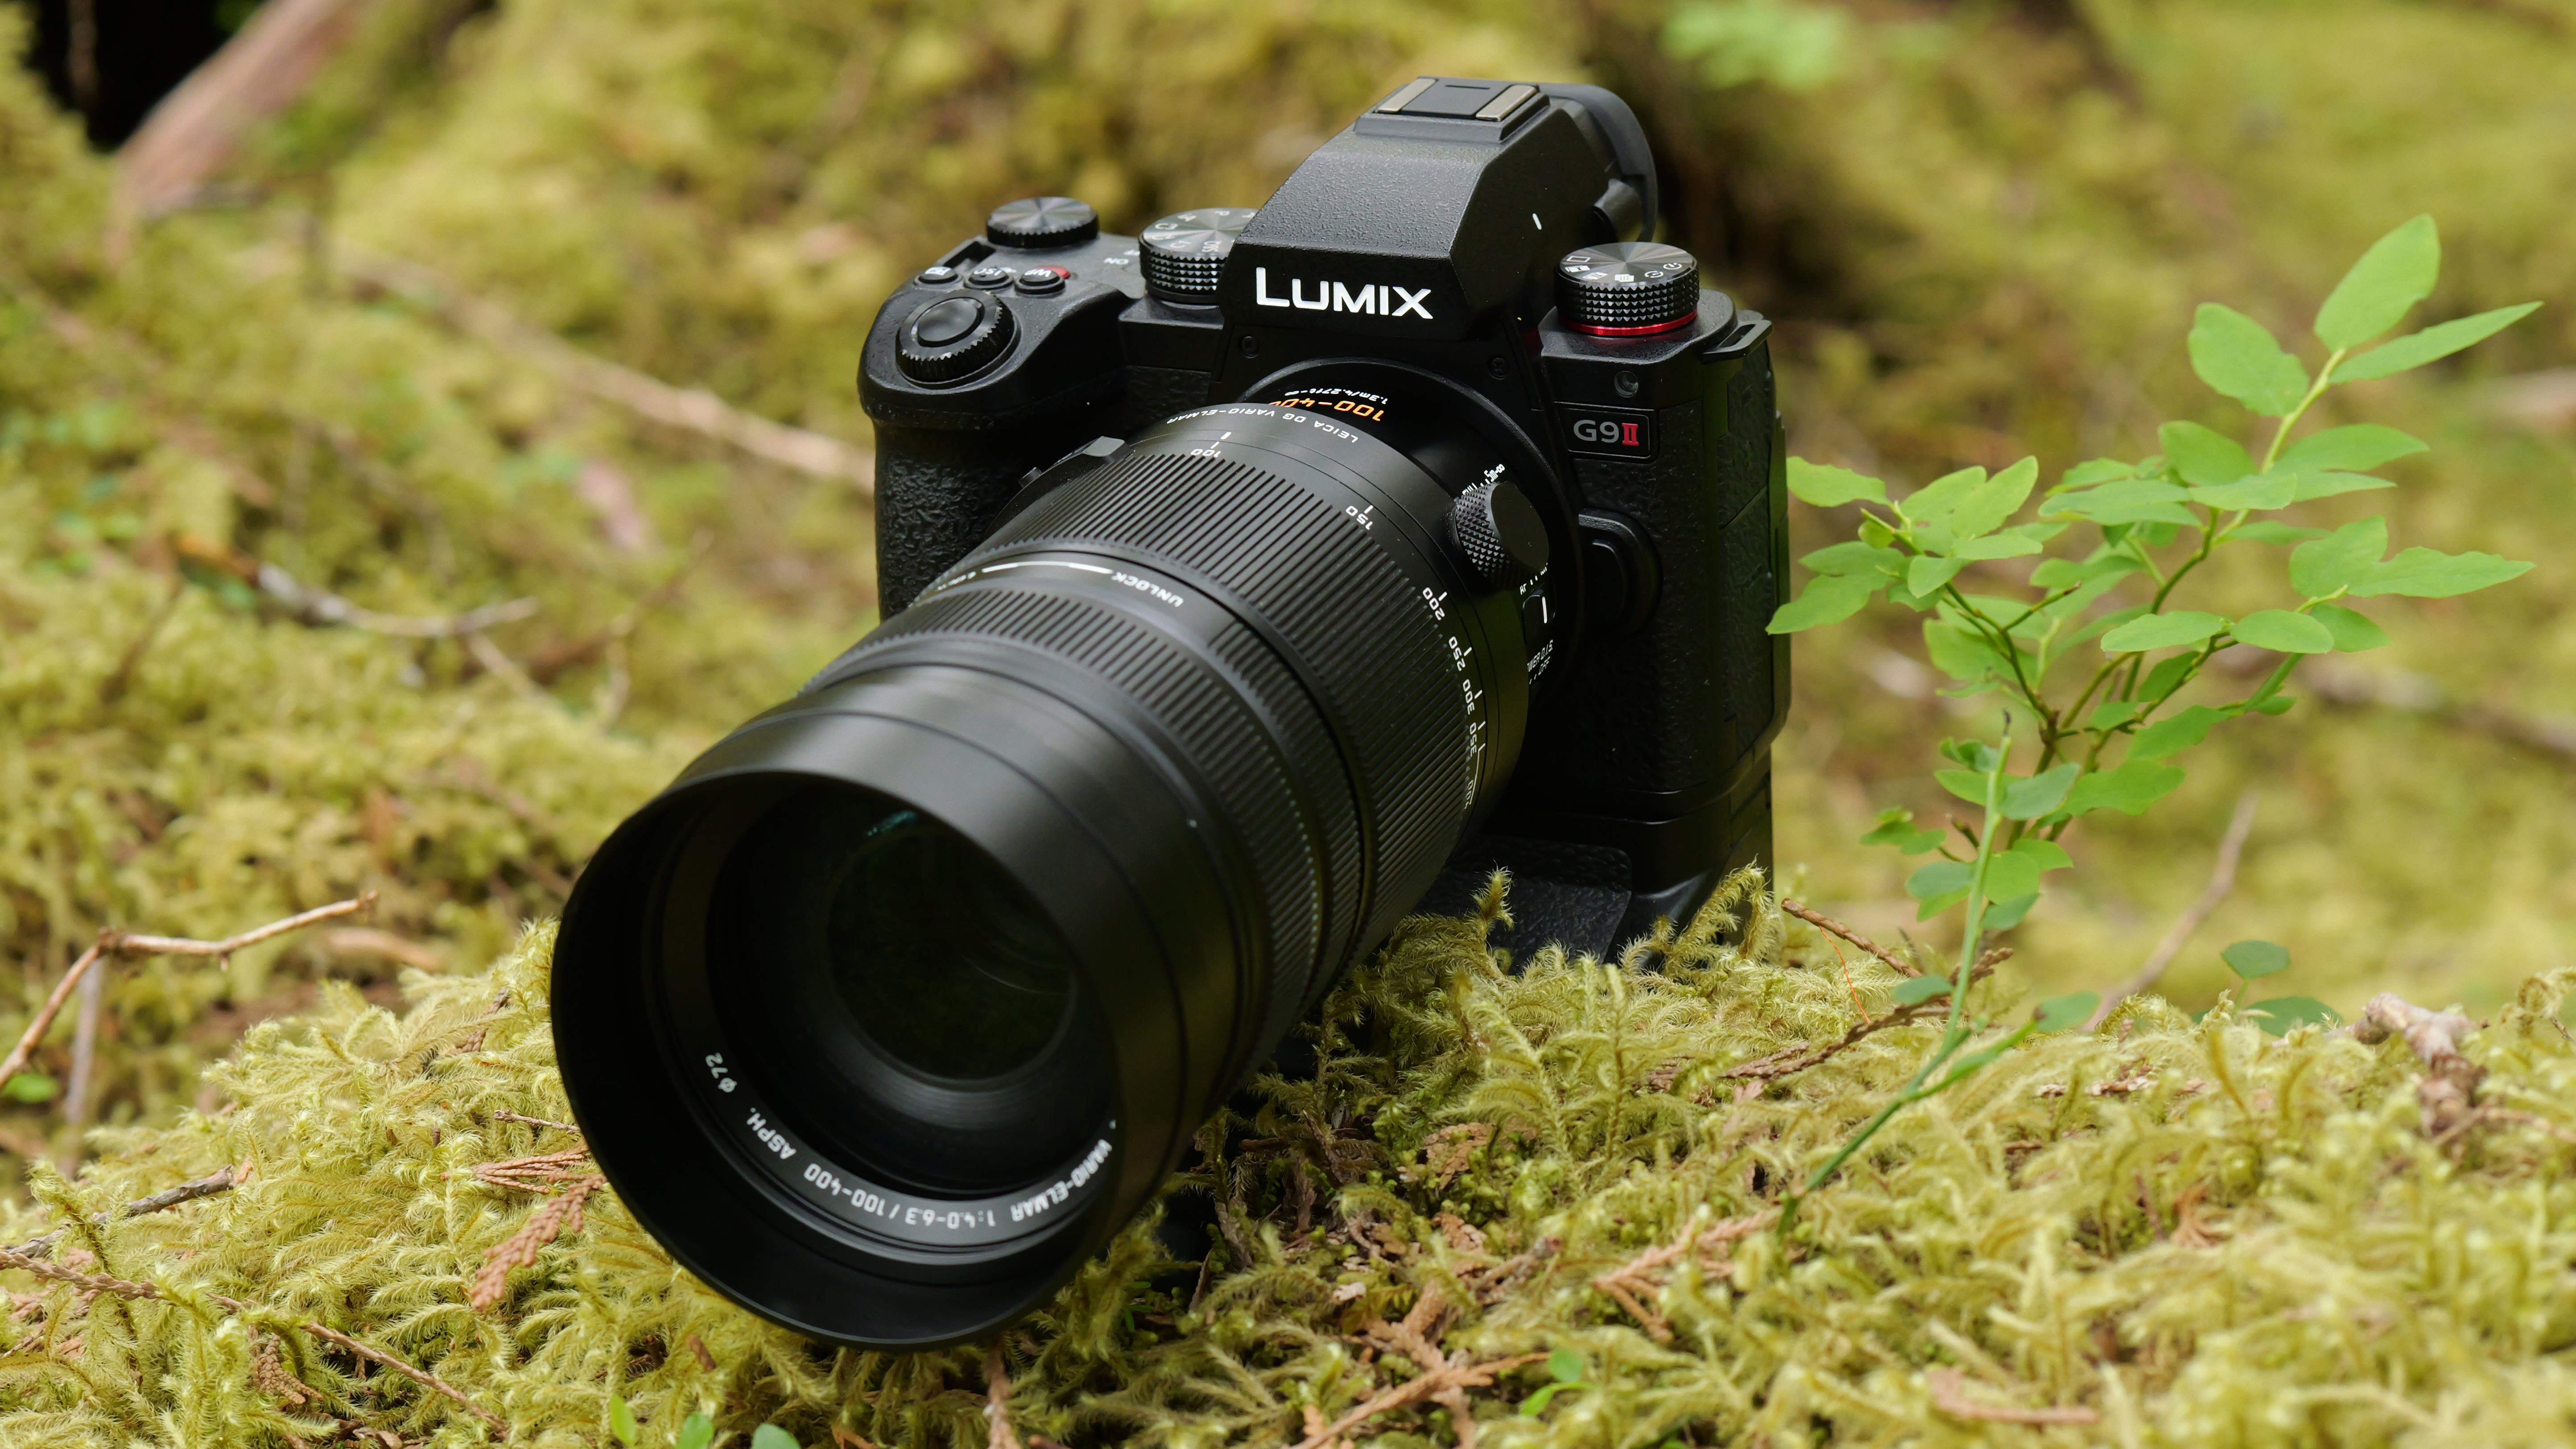 Lumix G9 II Review: MFT Upgrade For Professional Wildlife Photography